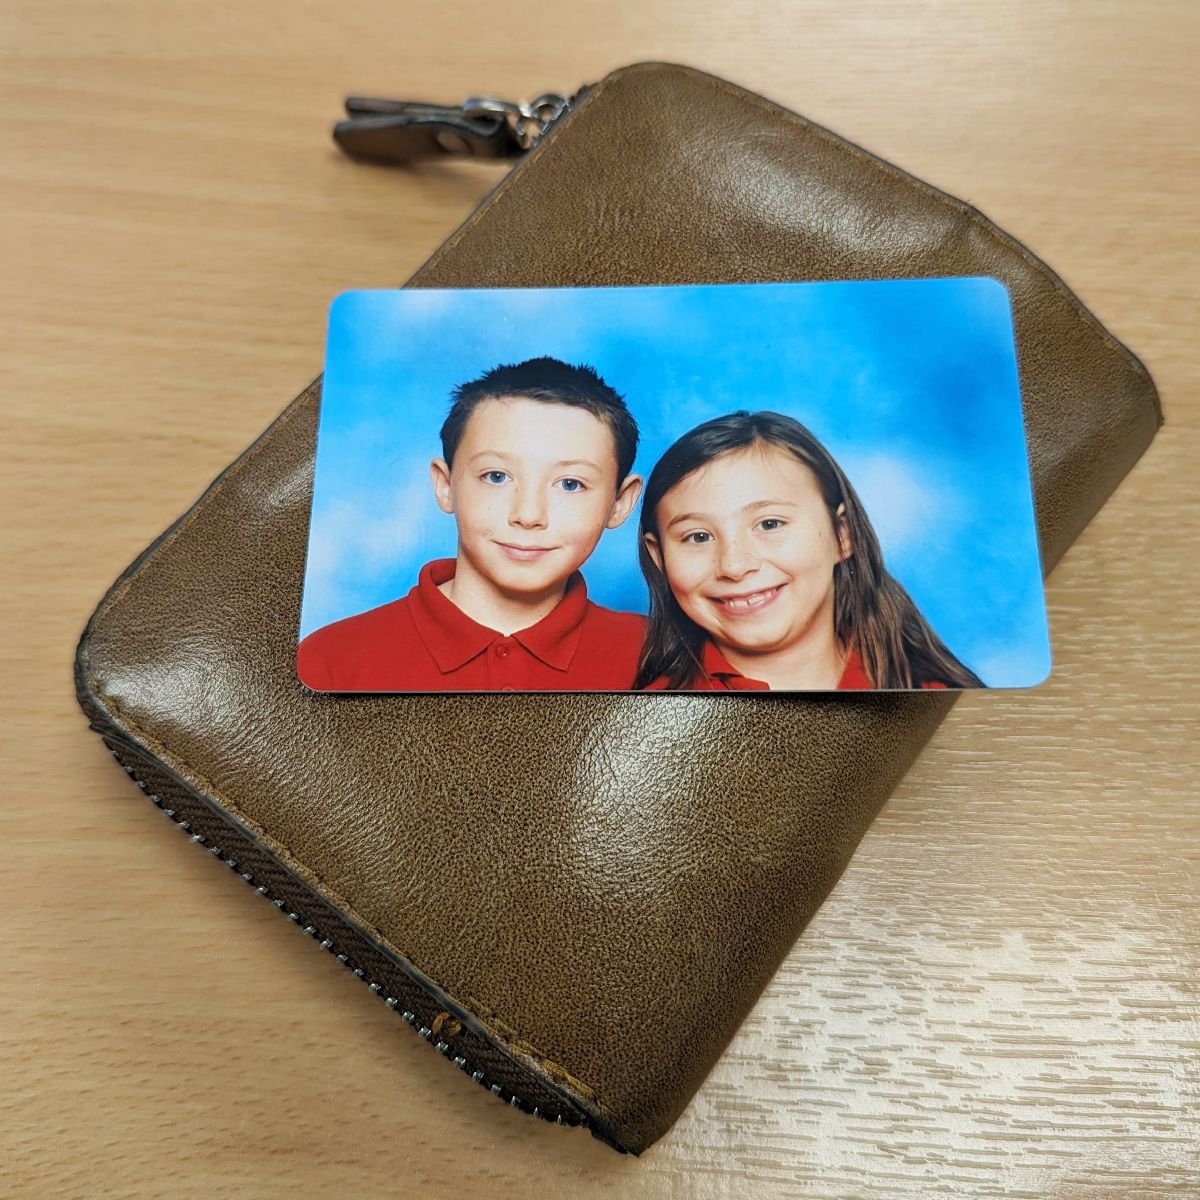 Personalised Printed Photo Credit Card Size Plastic - Ideal for Wallet or Purse